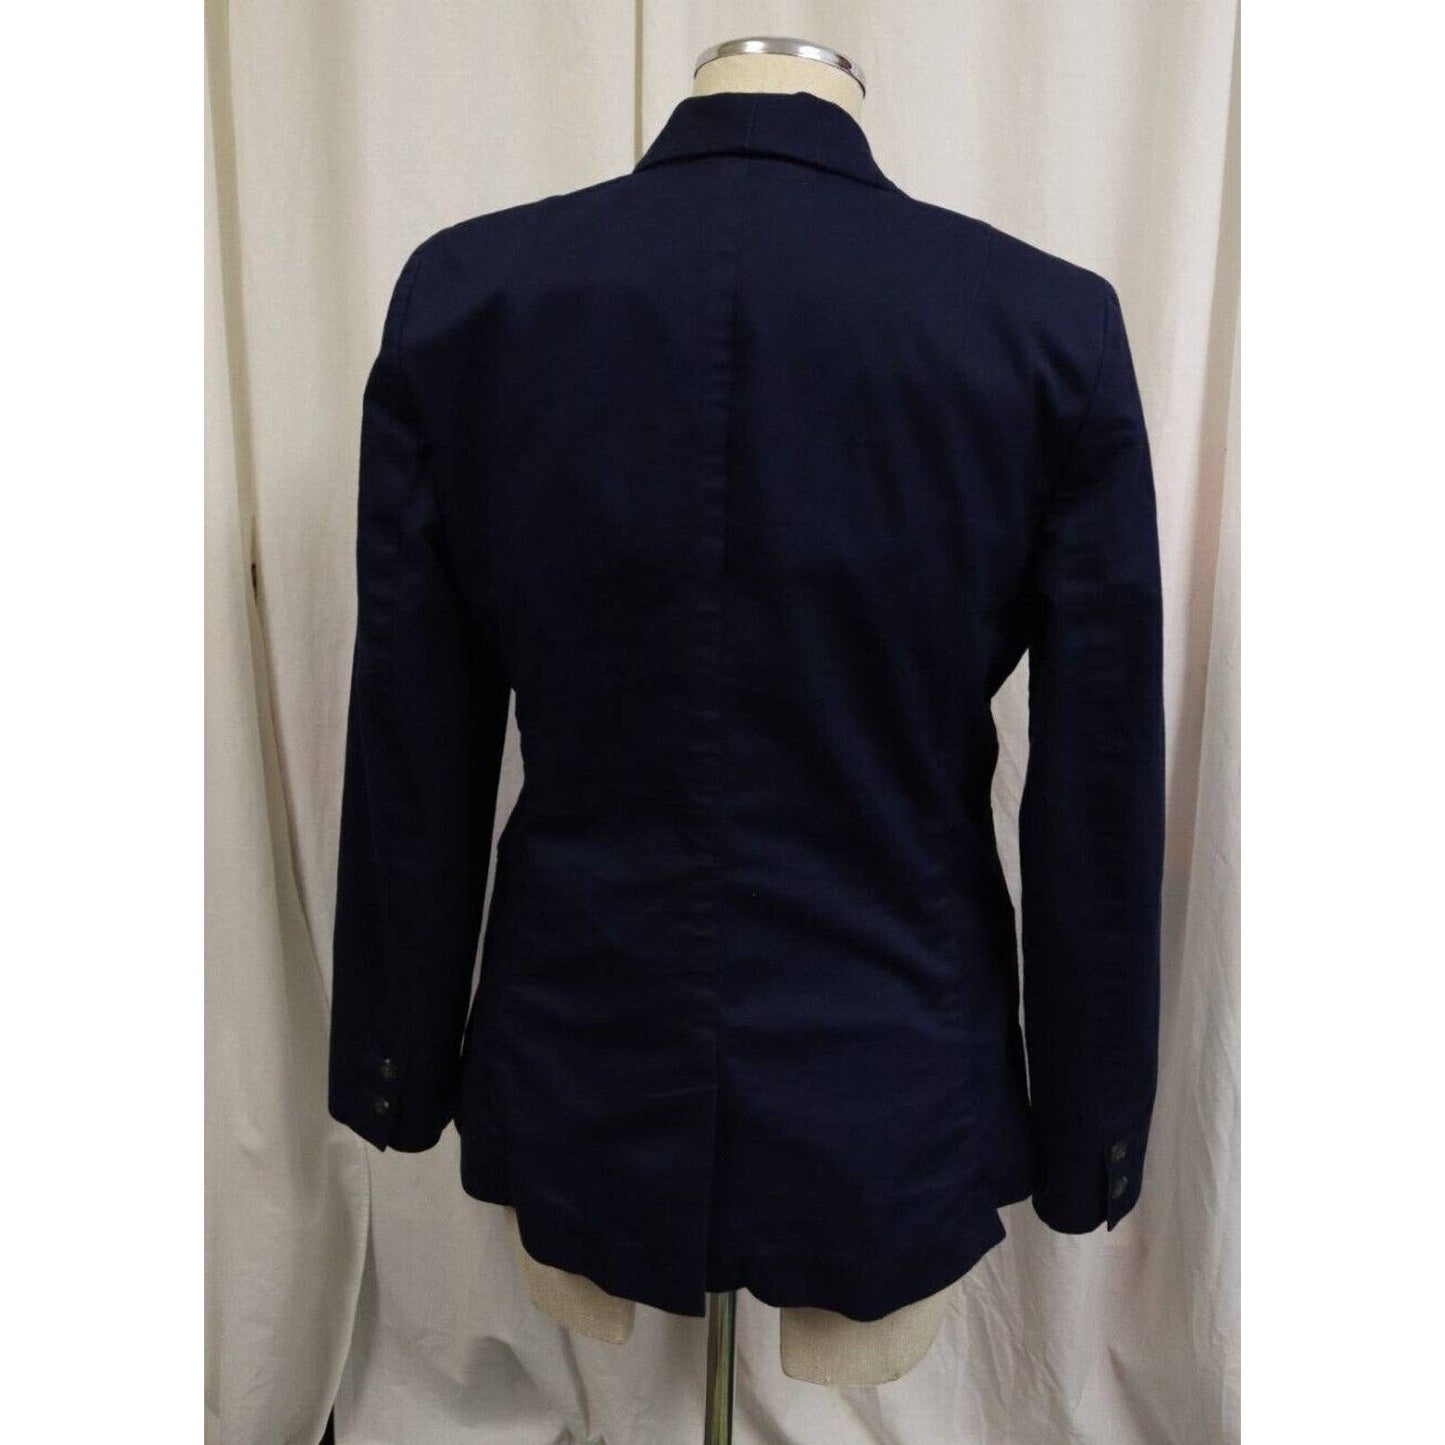 Wild Fang Blazer The Ace Collection Blue